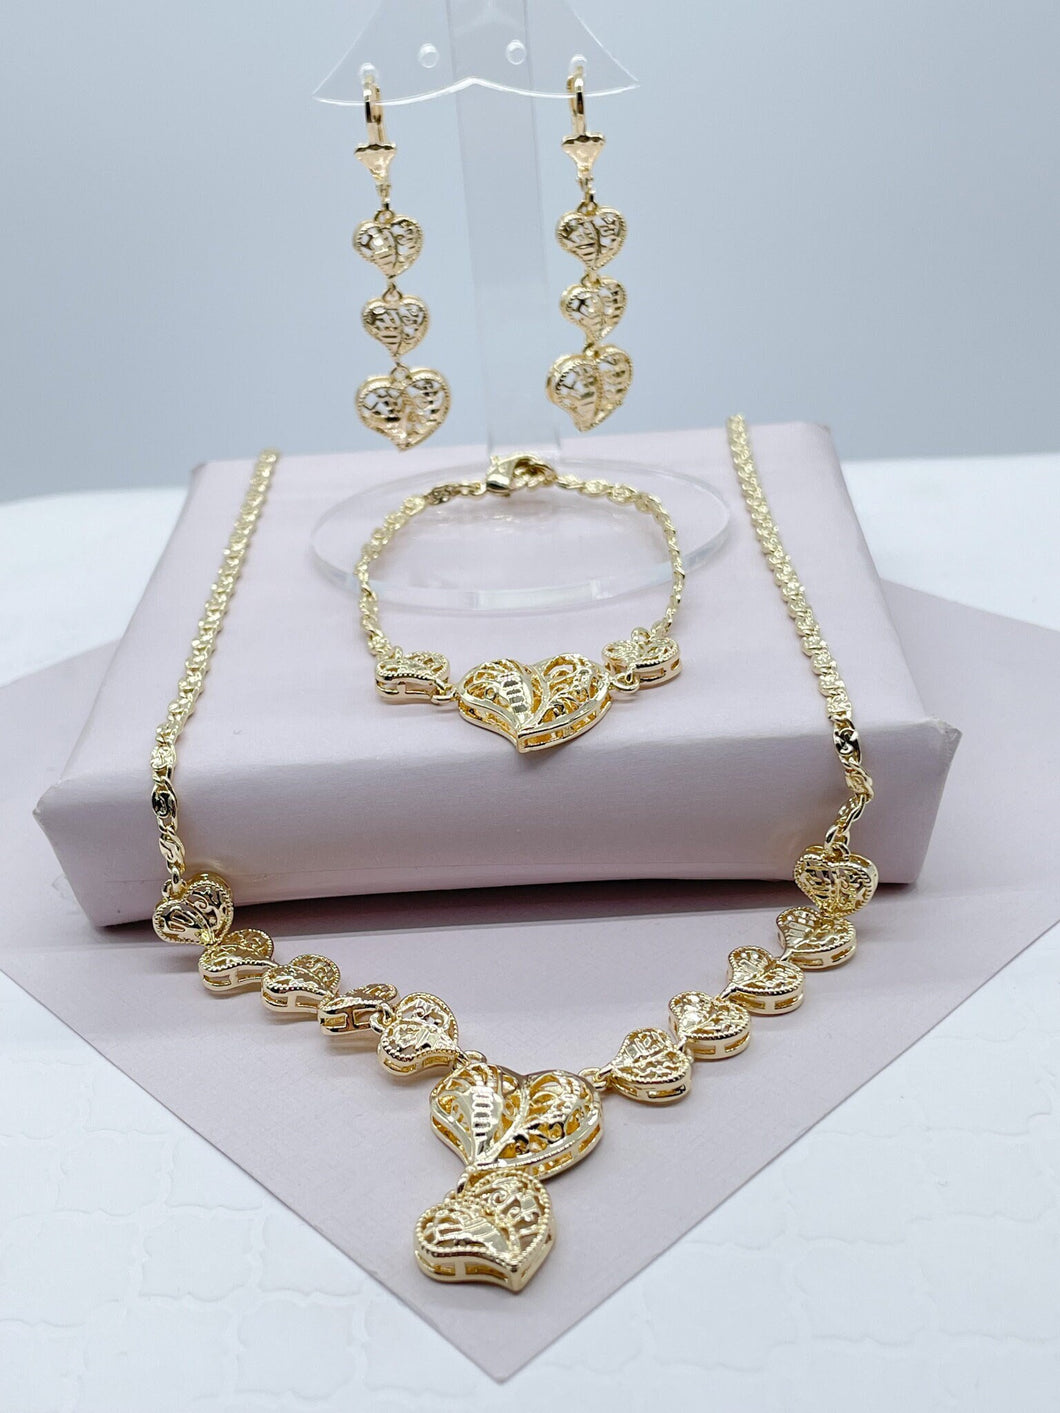 18k Gold Filled Vintage Color Heart Set Featuring Chunky Heart Necklace, Earrings, Bracelet  Jewelry